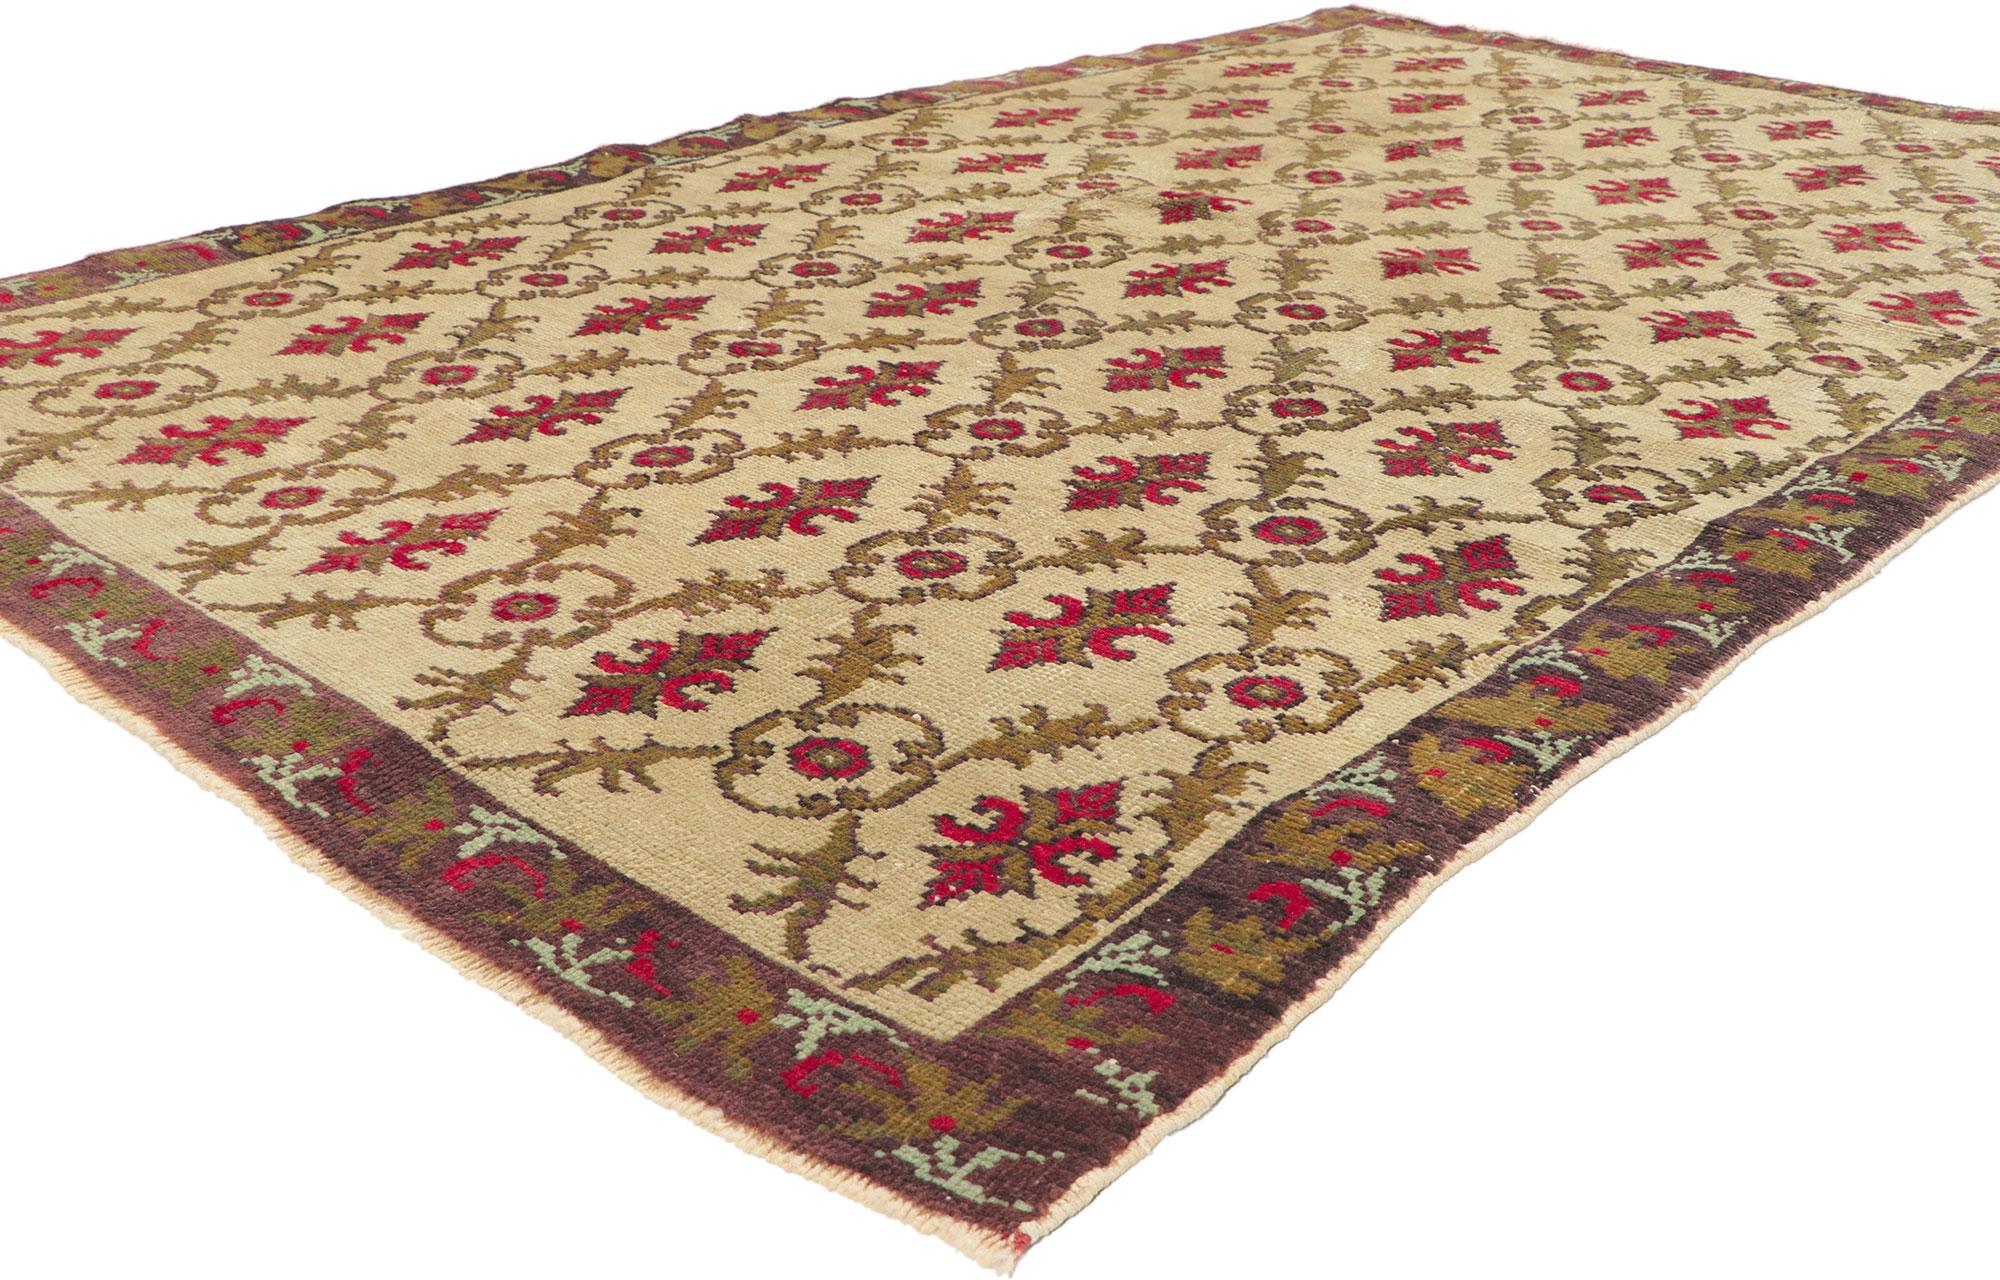 51671 vintage Turkish oushak rug, 04'11 x 08'03.
Showcasing traditional style with incredible detail and texture, this hand knotted wool vintage Turkish Oushak rug is a captivating vision of woven beauty. The timeless design and earthy colorway